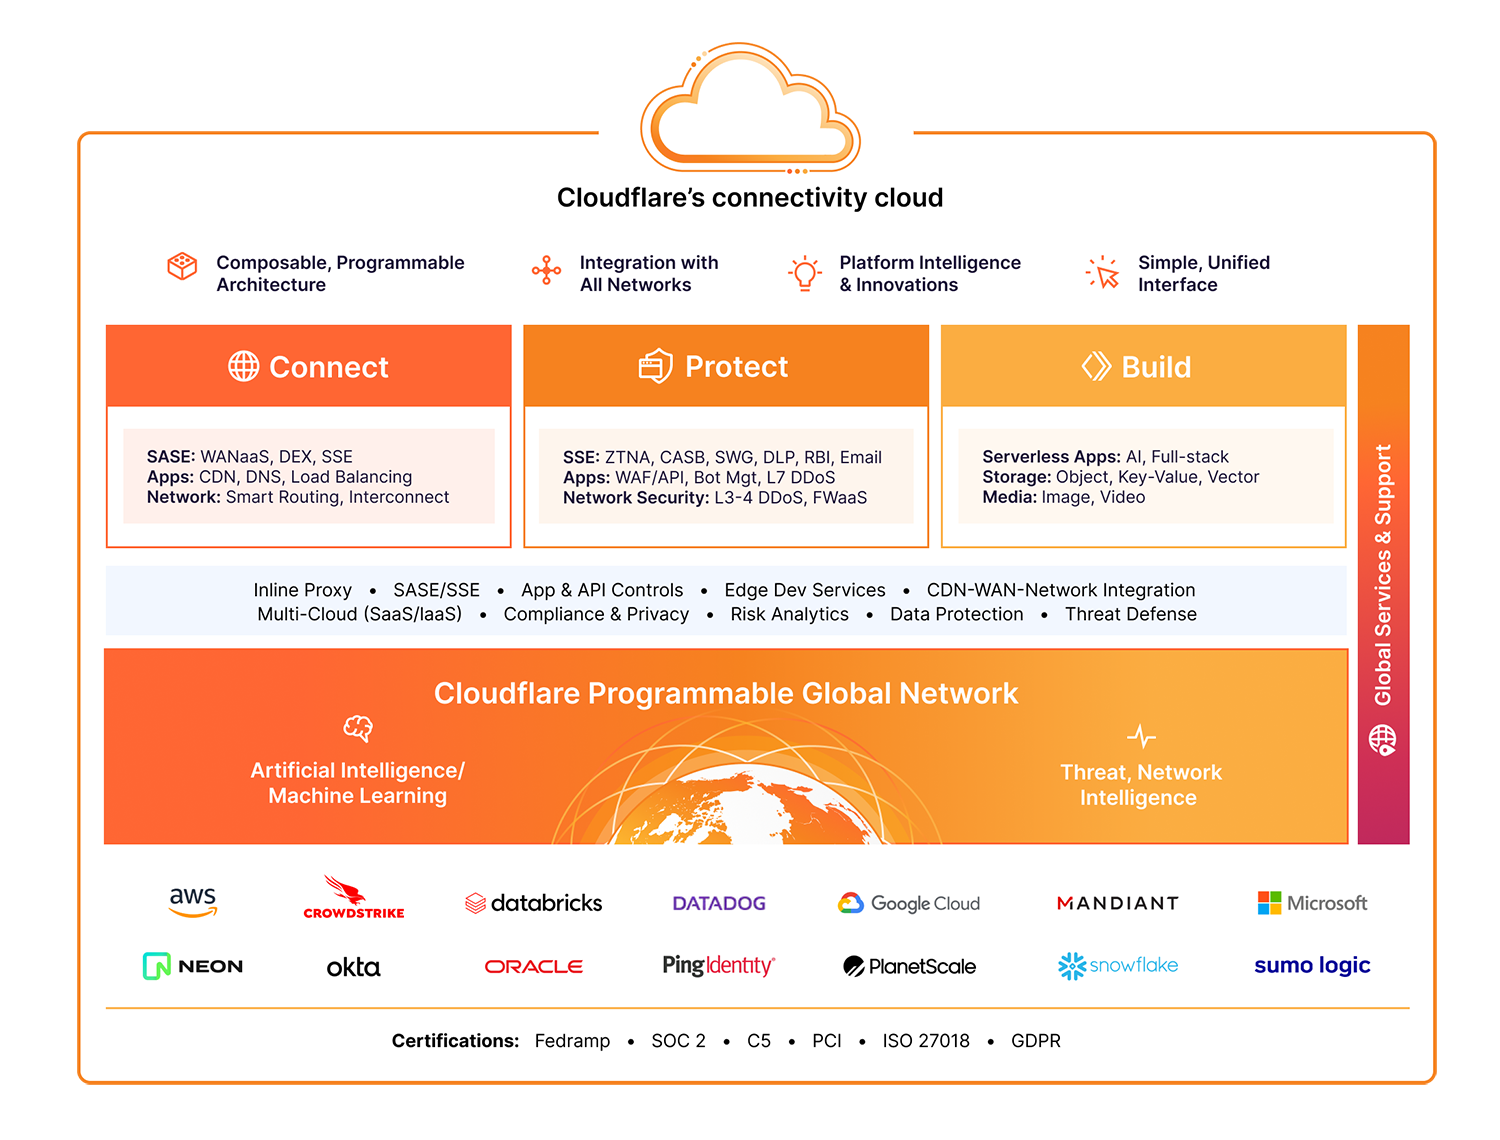 Cloudflare Product areas